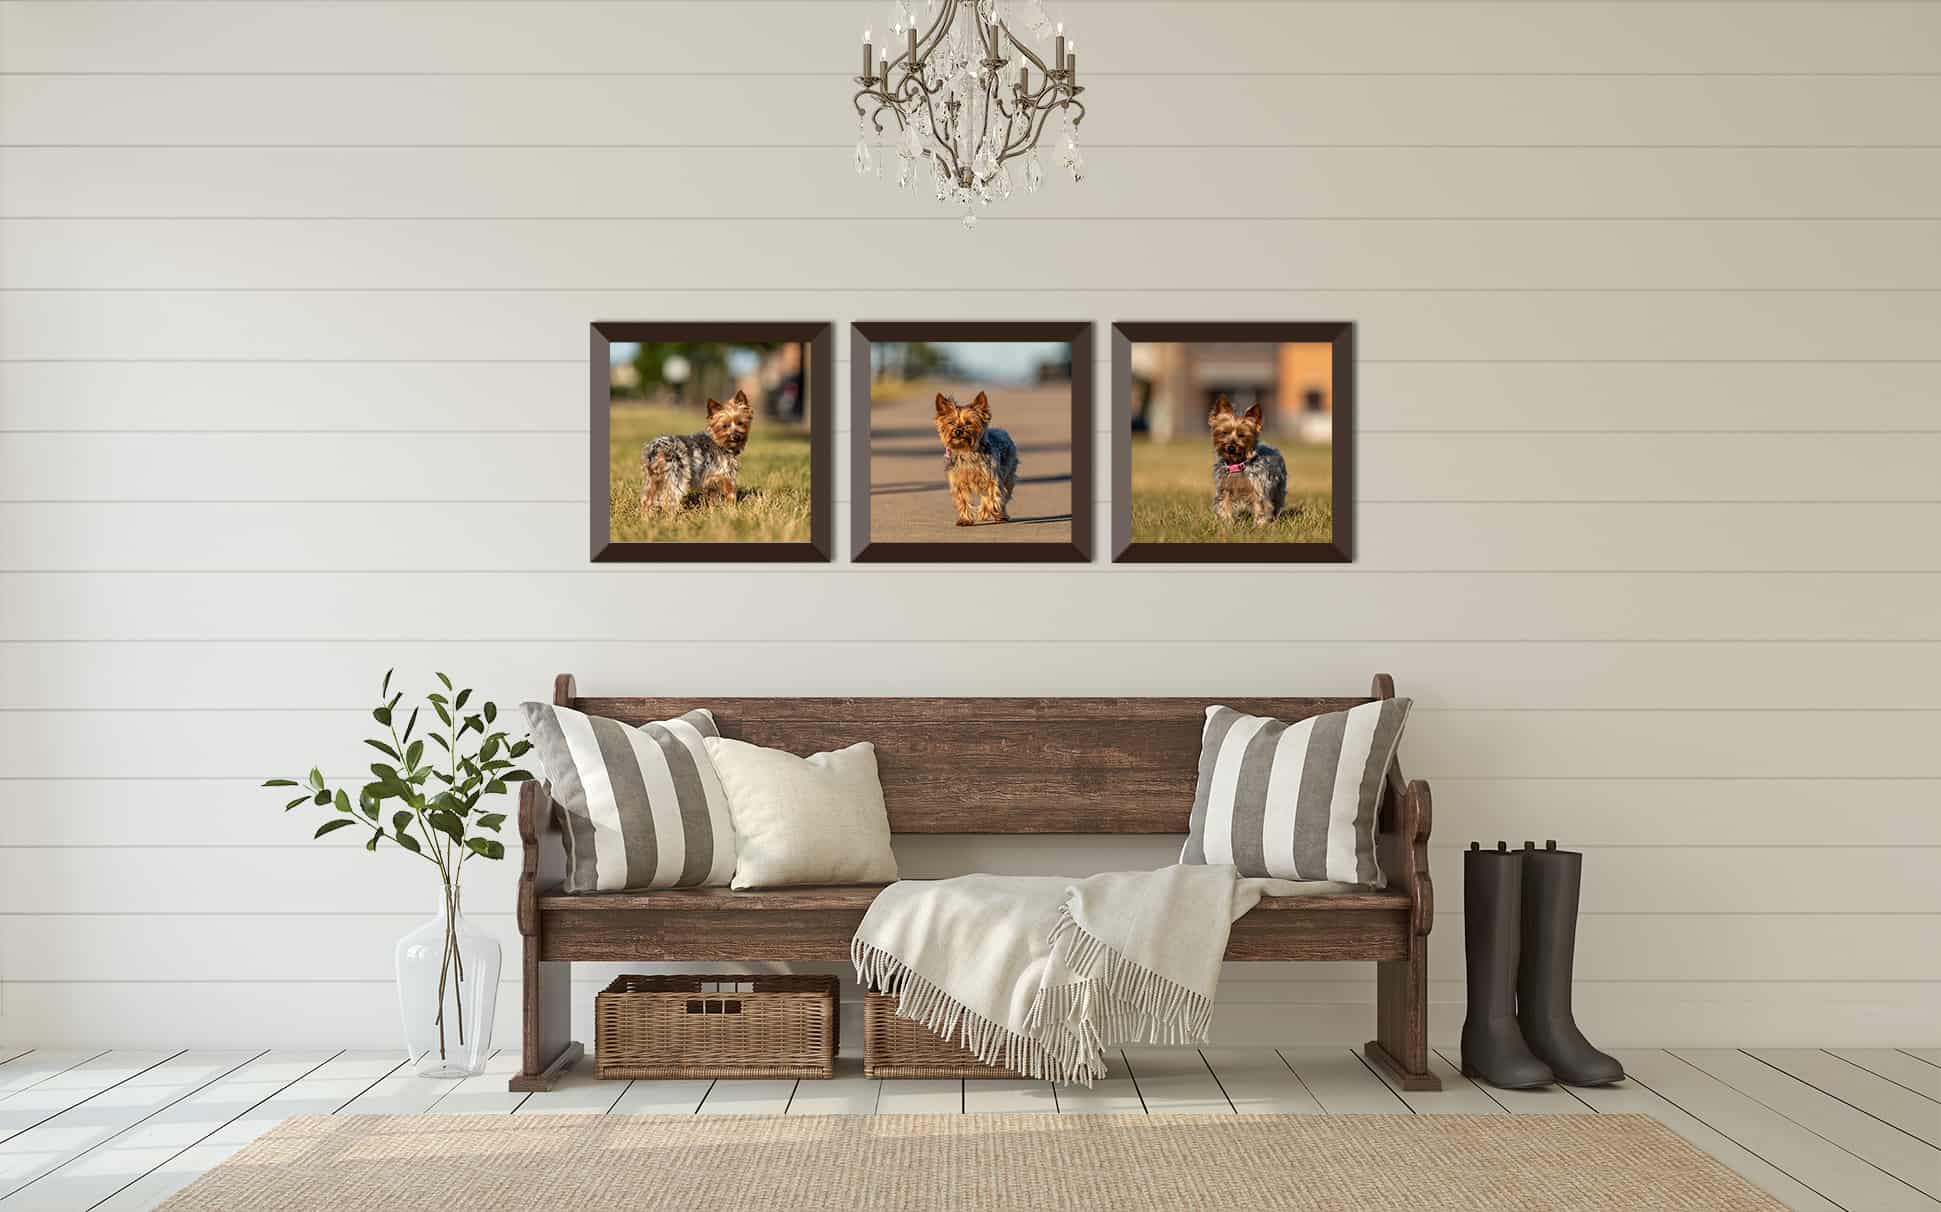 Three Framed Prints of a Dog in a Home Entryway